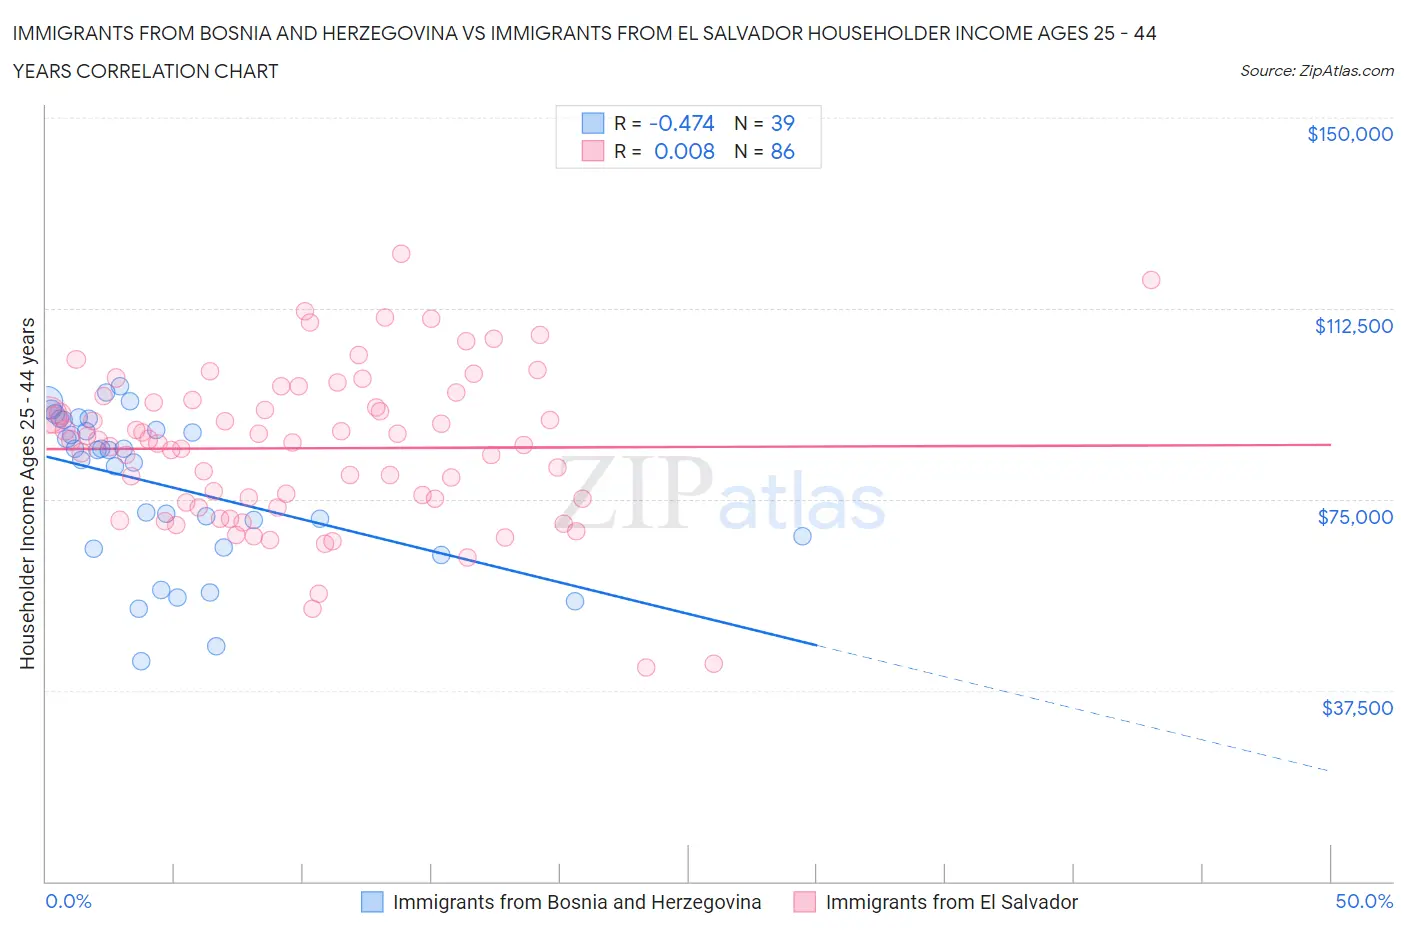 Immigrants from Bosnia and Herzegovina vs Immigrants from El Salvador Householder Income Ages 25 - 44 years